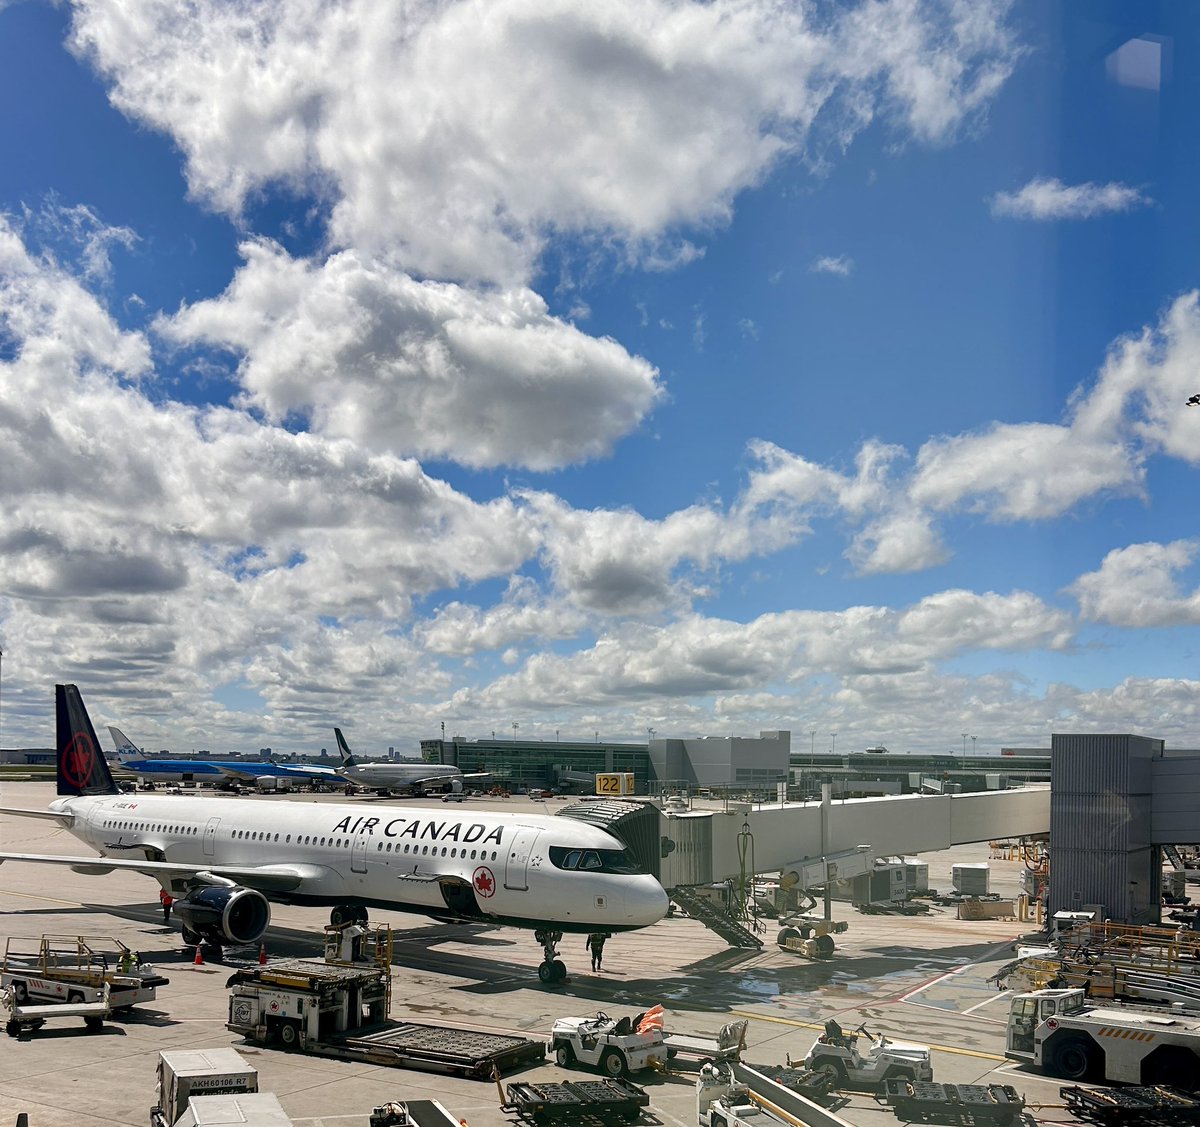 Flights in and out of Toronto Pearson are experiencing delays due to strong winds in the area. Weather conditions are expected to impact operations into the evening. torontopearson.com/en/airport-wai…